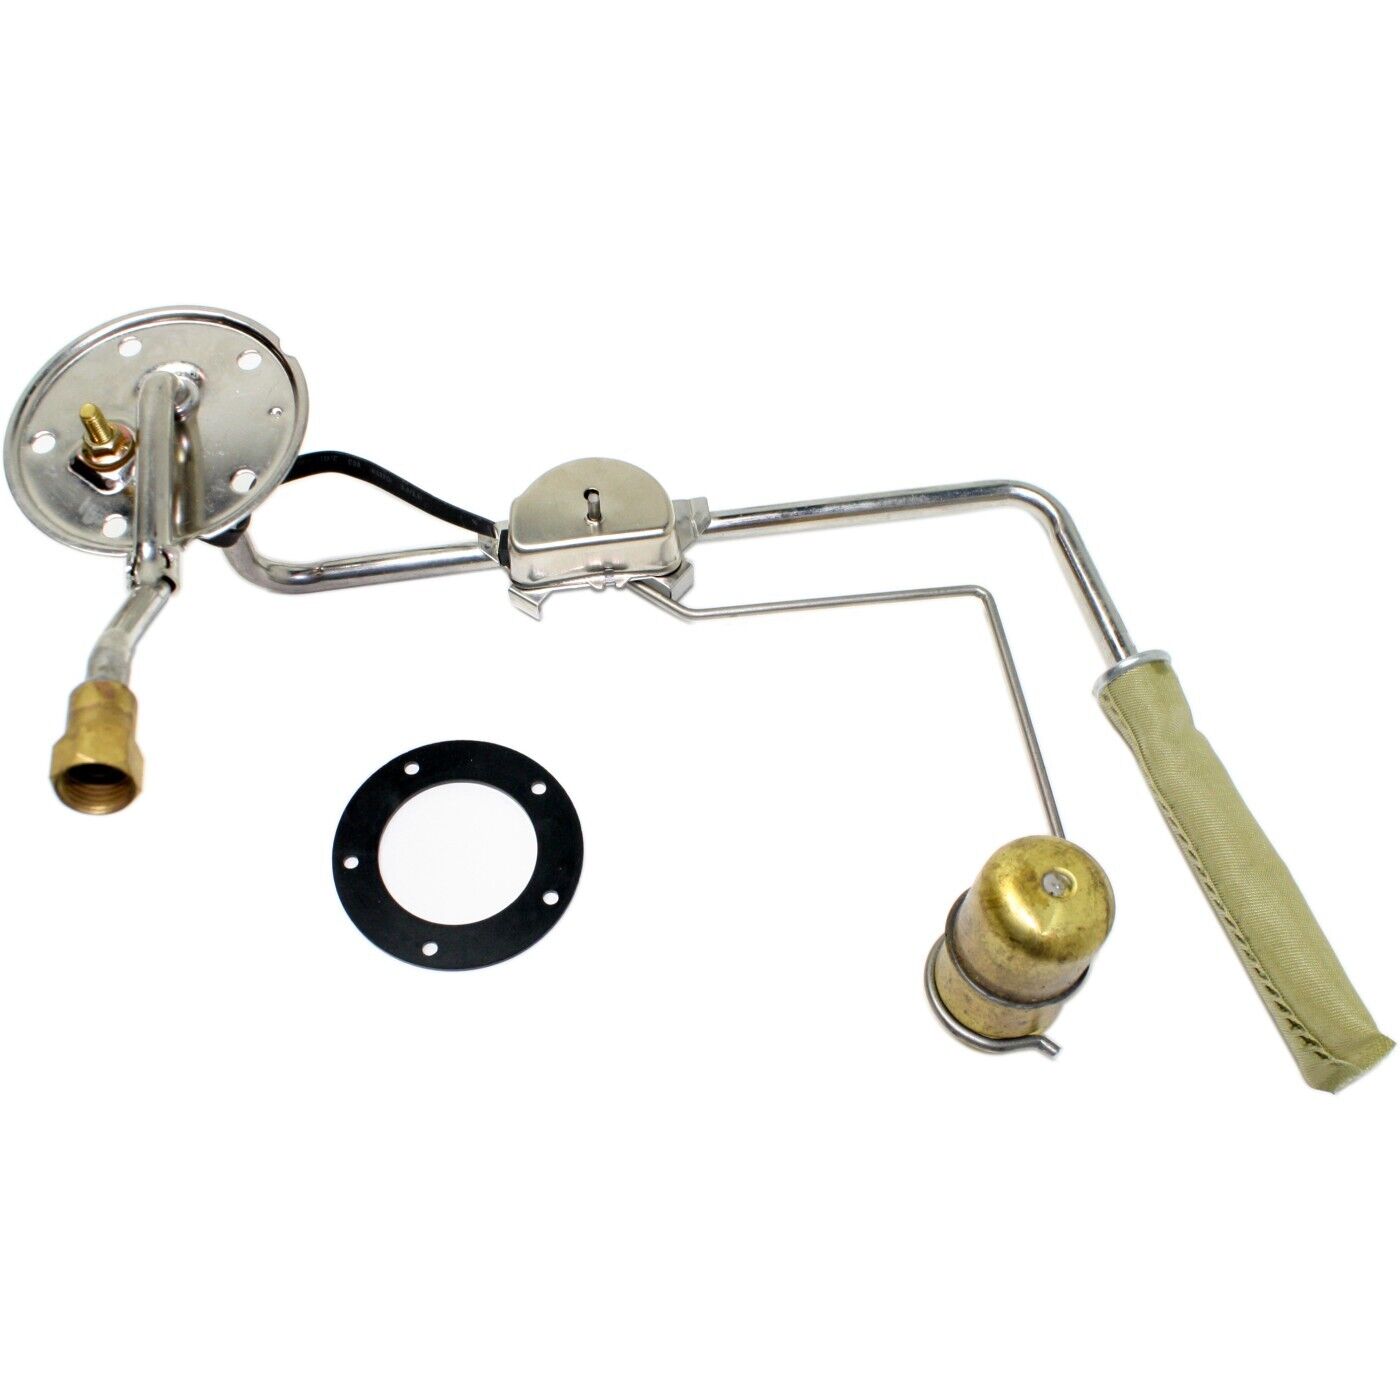 Fuel Sending Unit For 1955-57 Chevrolet Bel Air One-Fifty Series Wagon Strainer